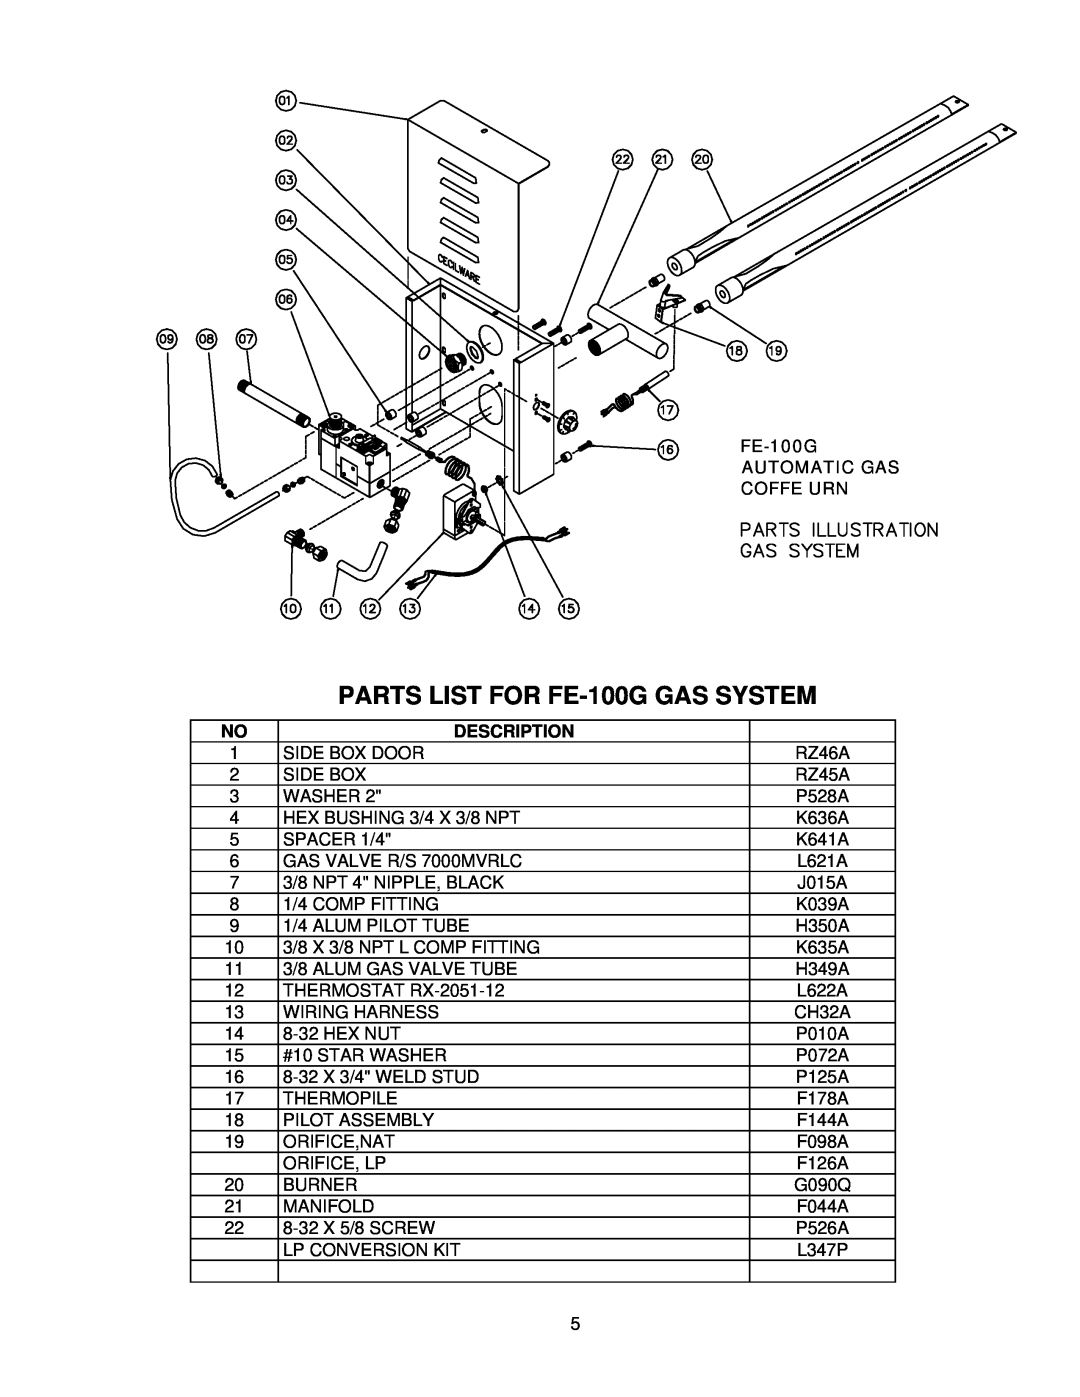 Cecilware operation manual PARTS LIST FOR FE-100GGAS SYSTEM, Description 